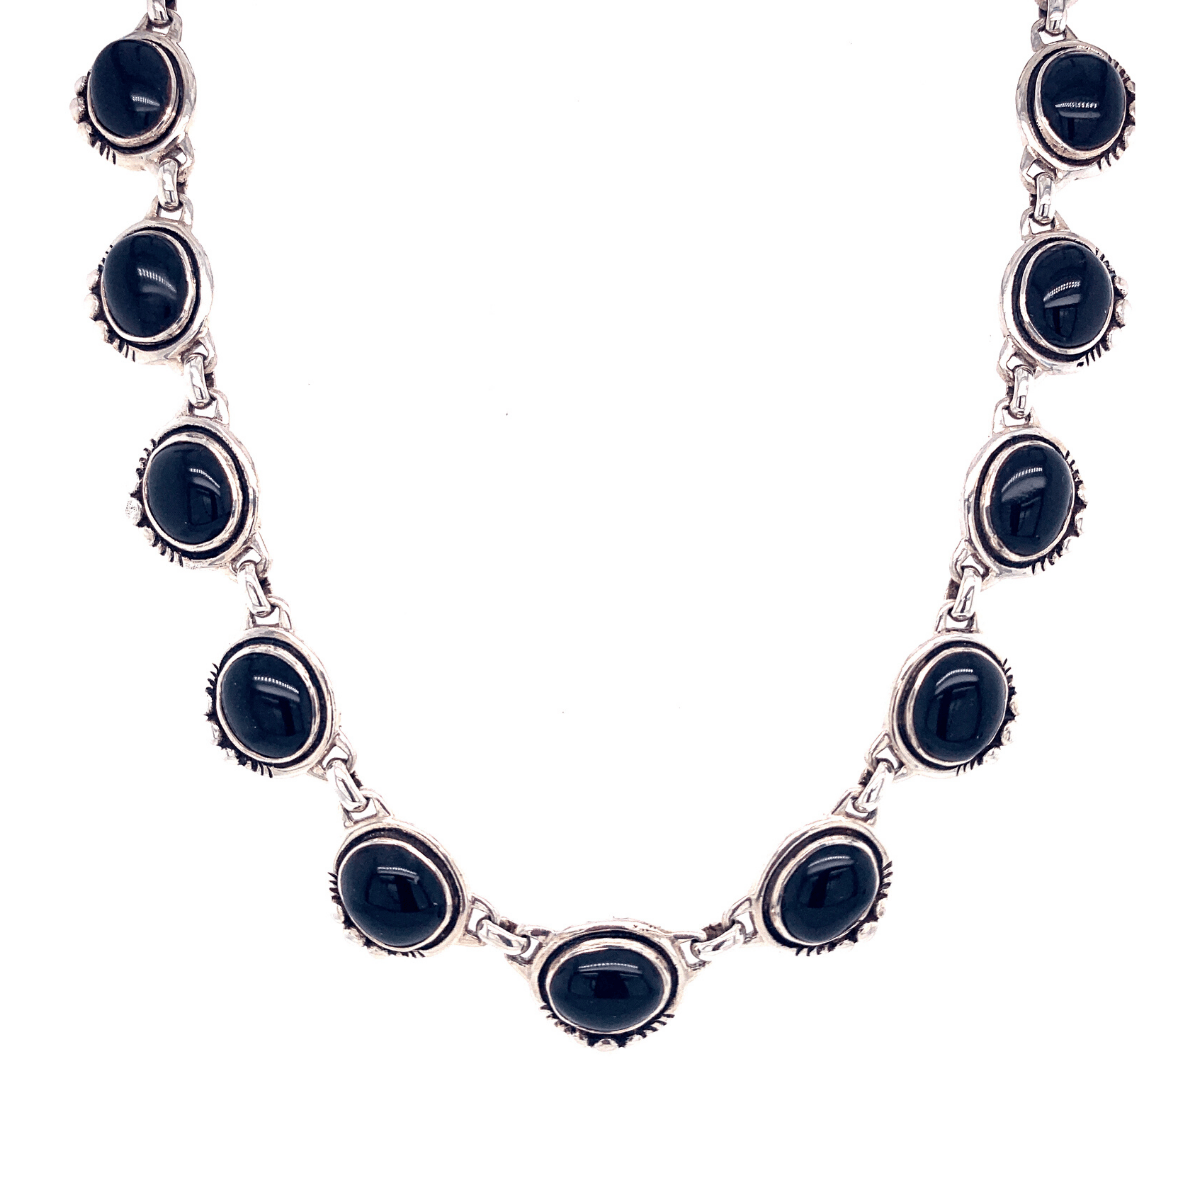 Black Onyx Ovals &amp; Sterling Silver Necklace - Qinti - The Peruvian Shop